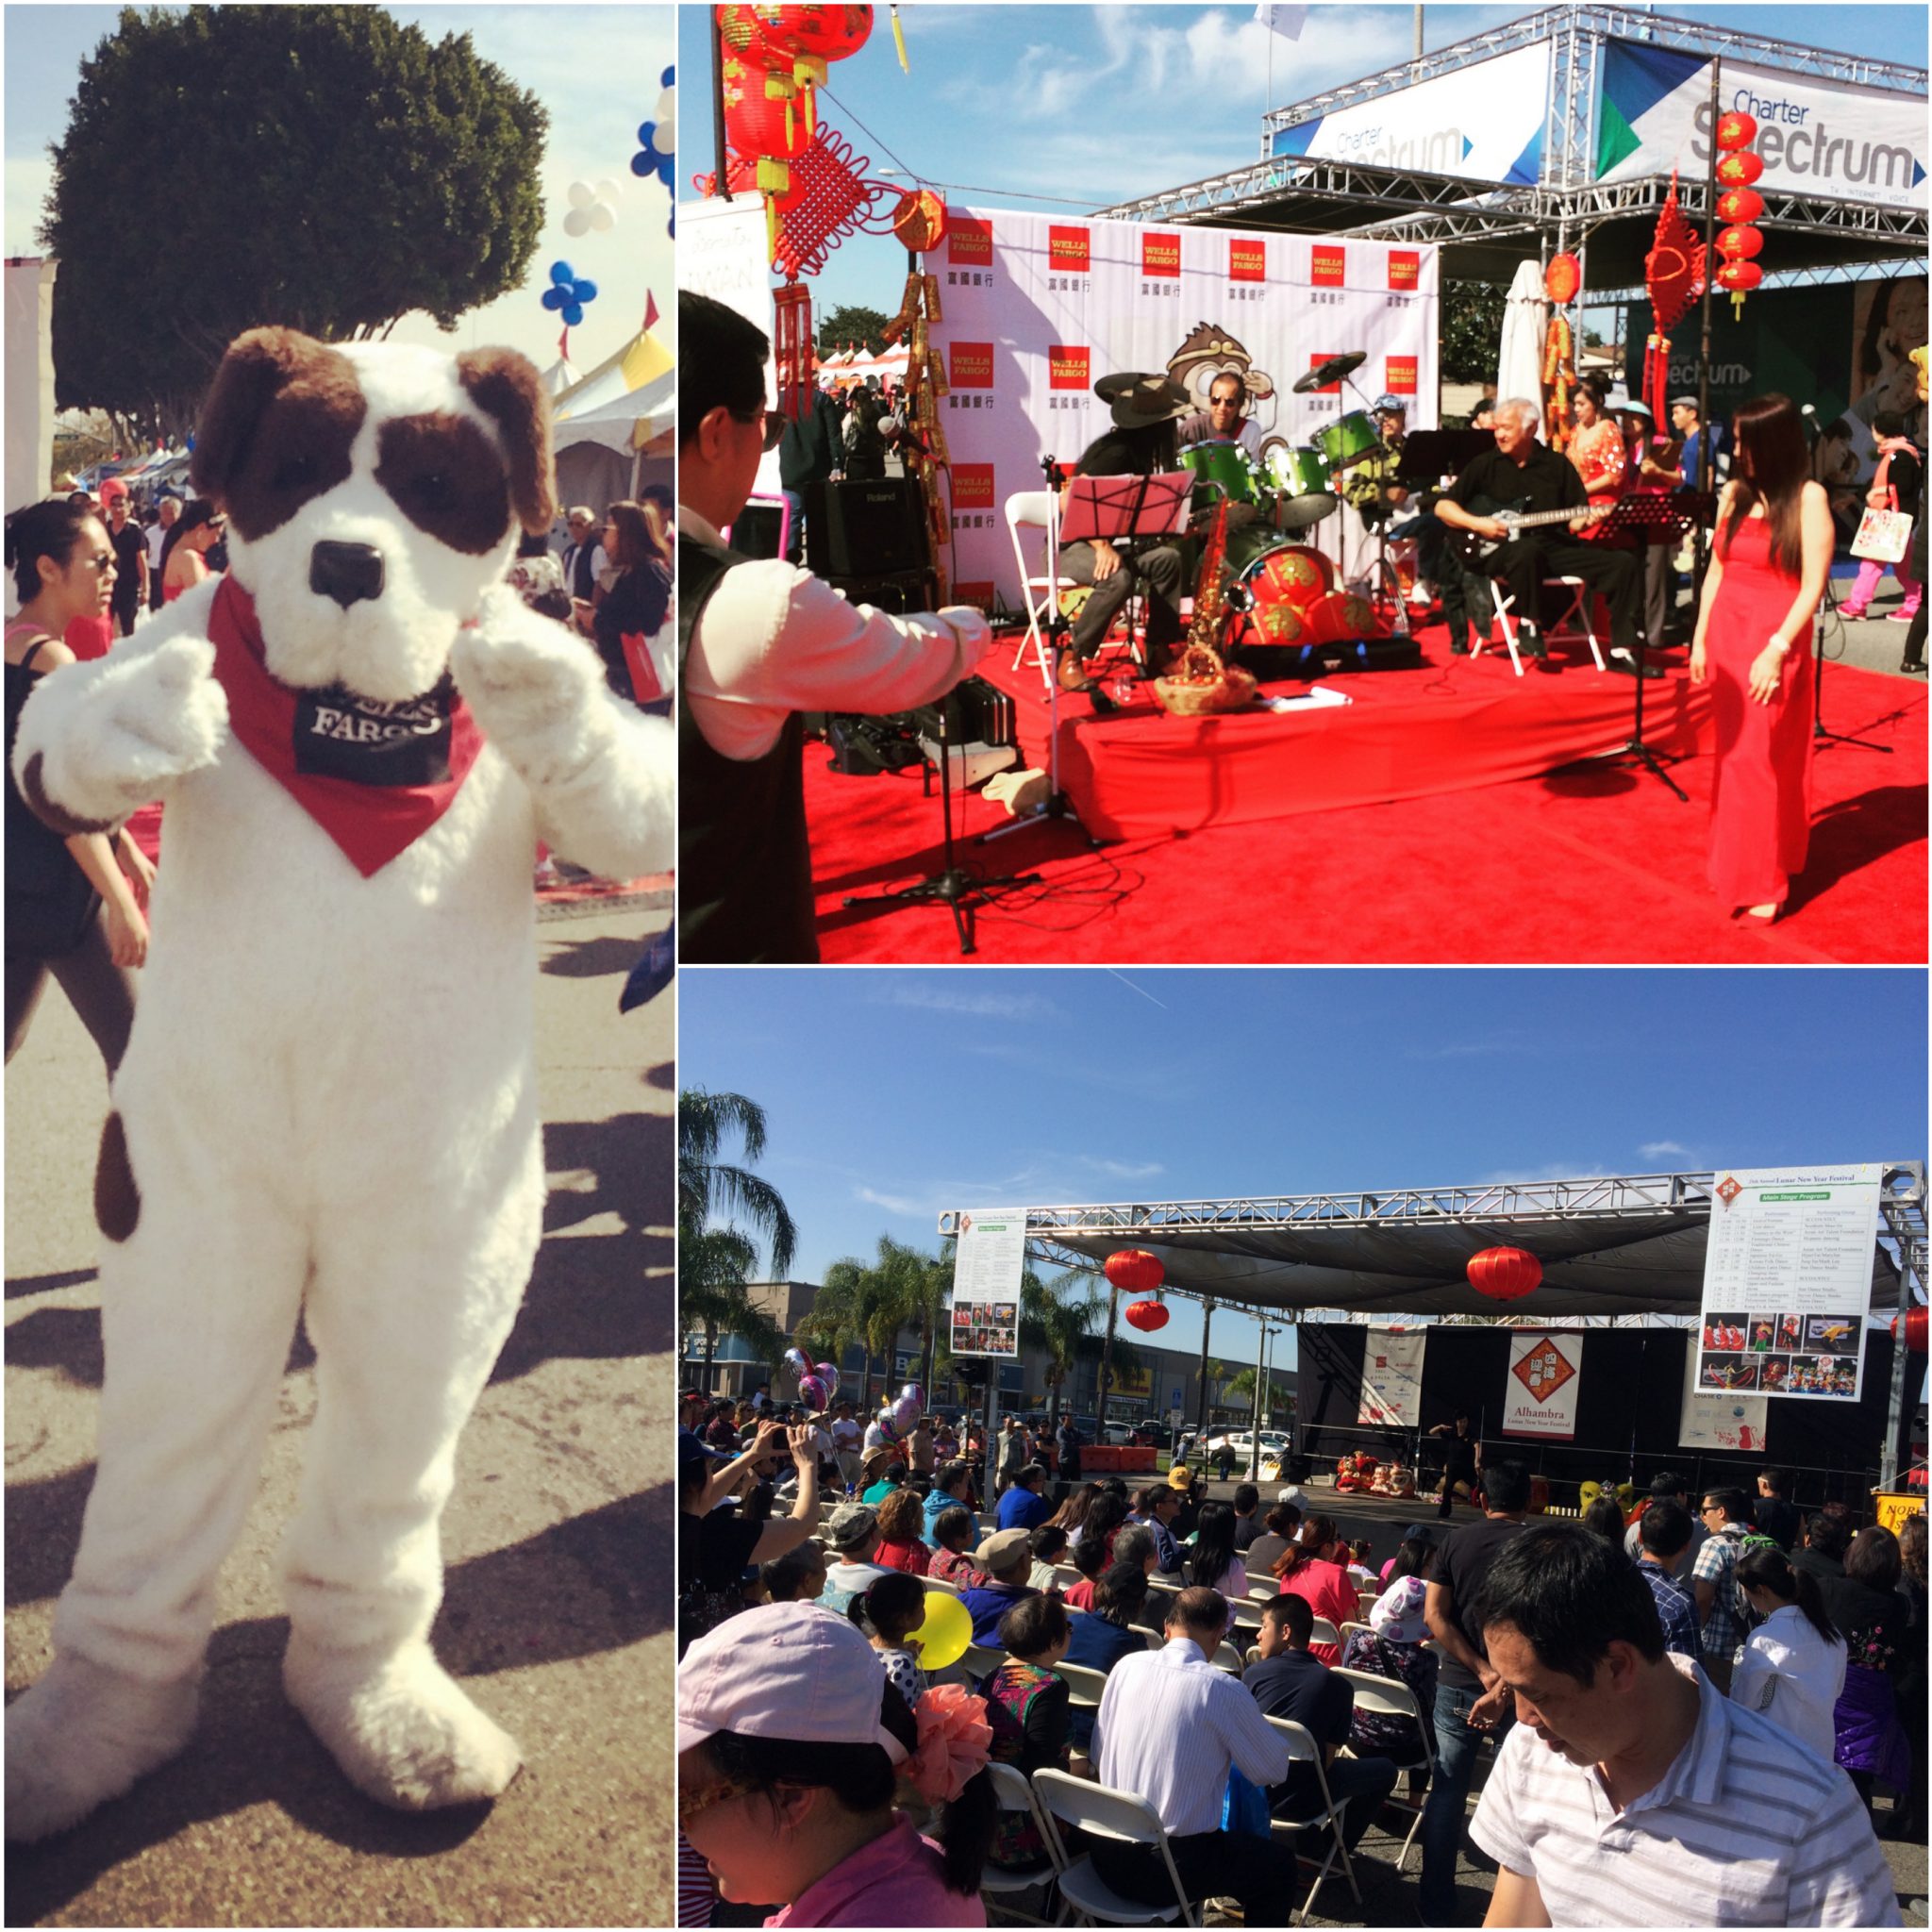 instagram-pslilyboutique-dog-chinese-new-year-festival-california-red-carpet-2-15-16